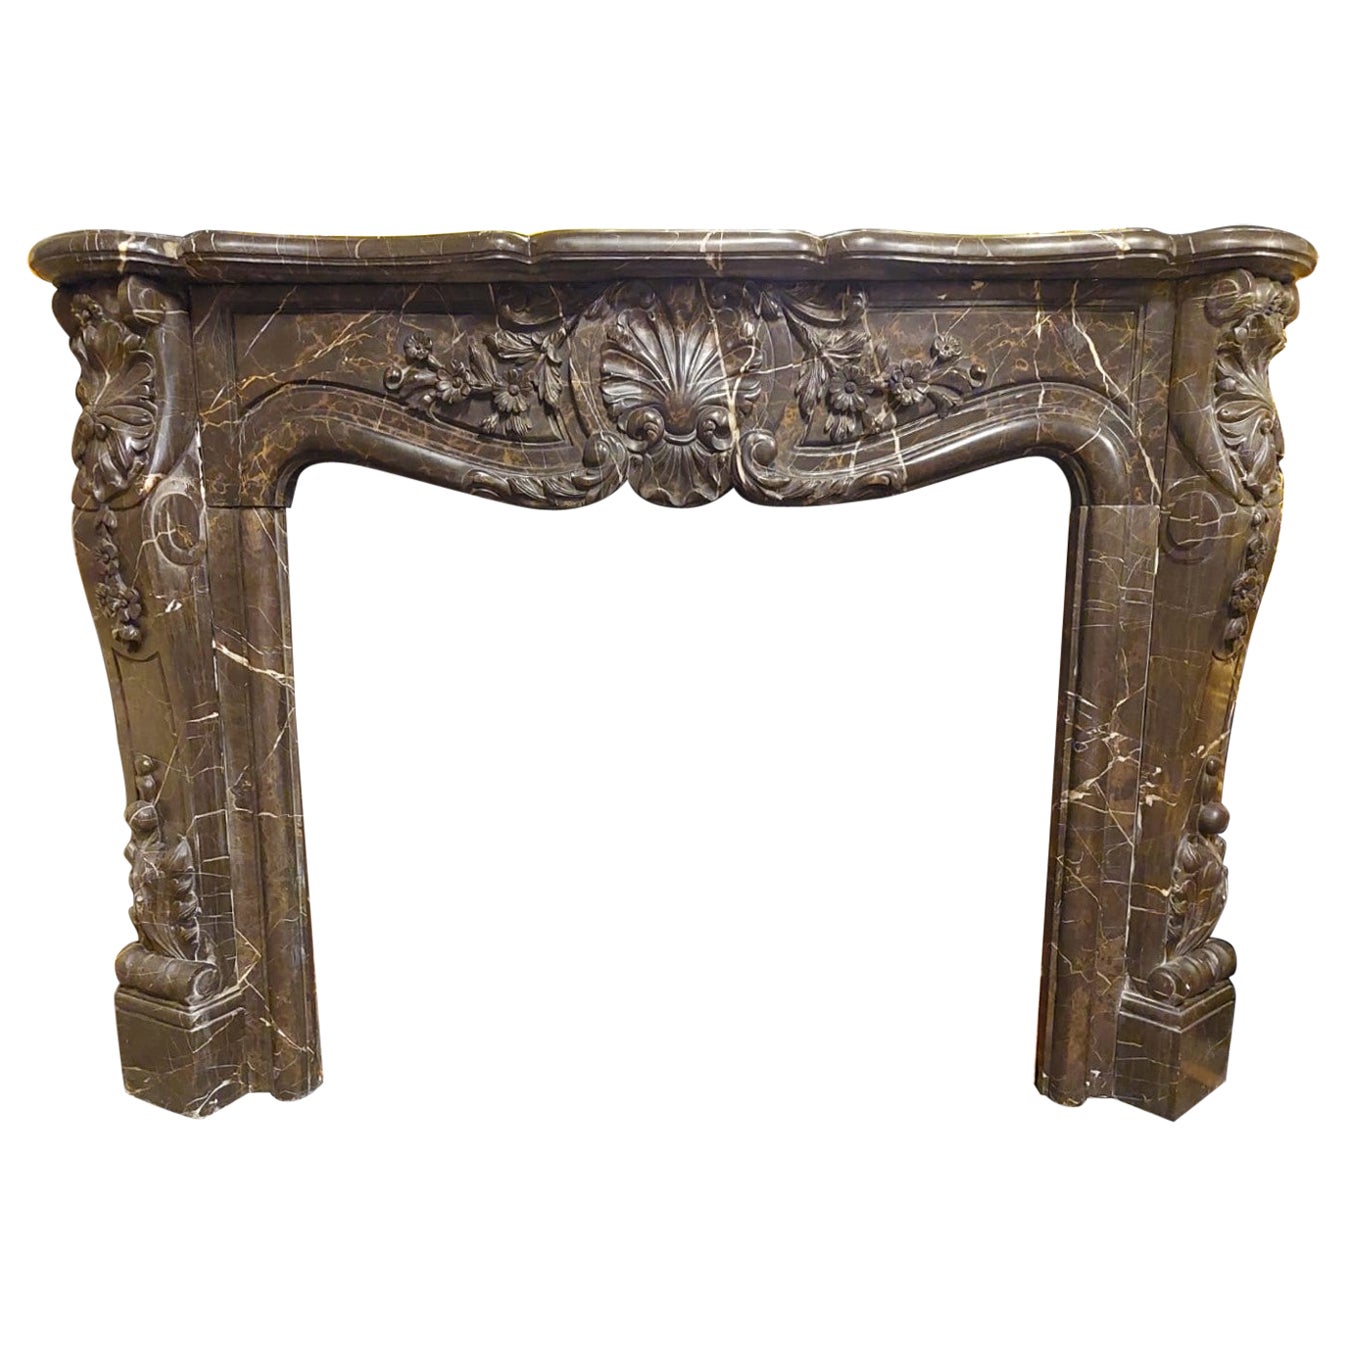 Mantle Fireplace Richly Carved Black Marble, Central Shell, 19th Century, Italy